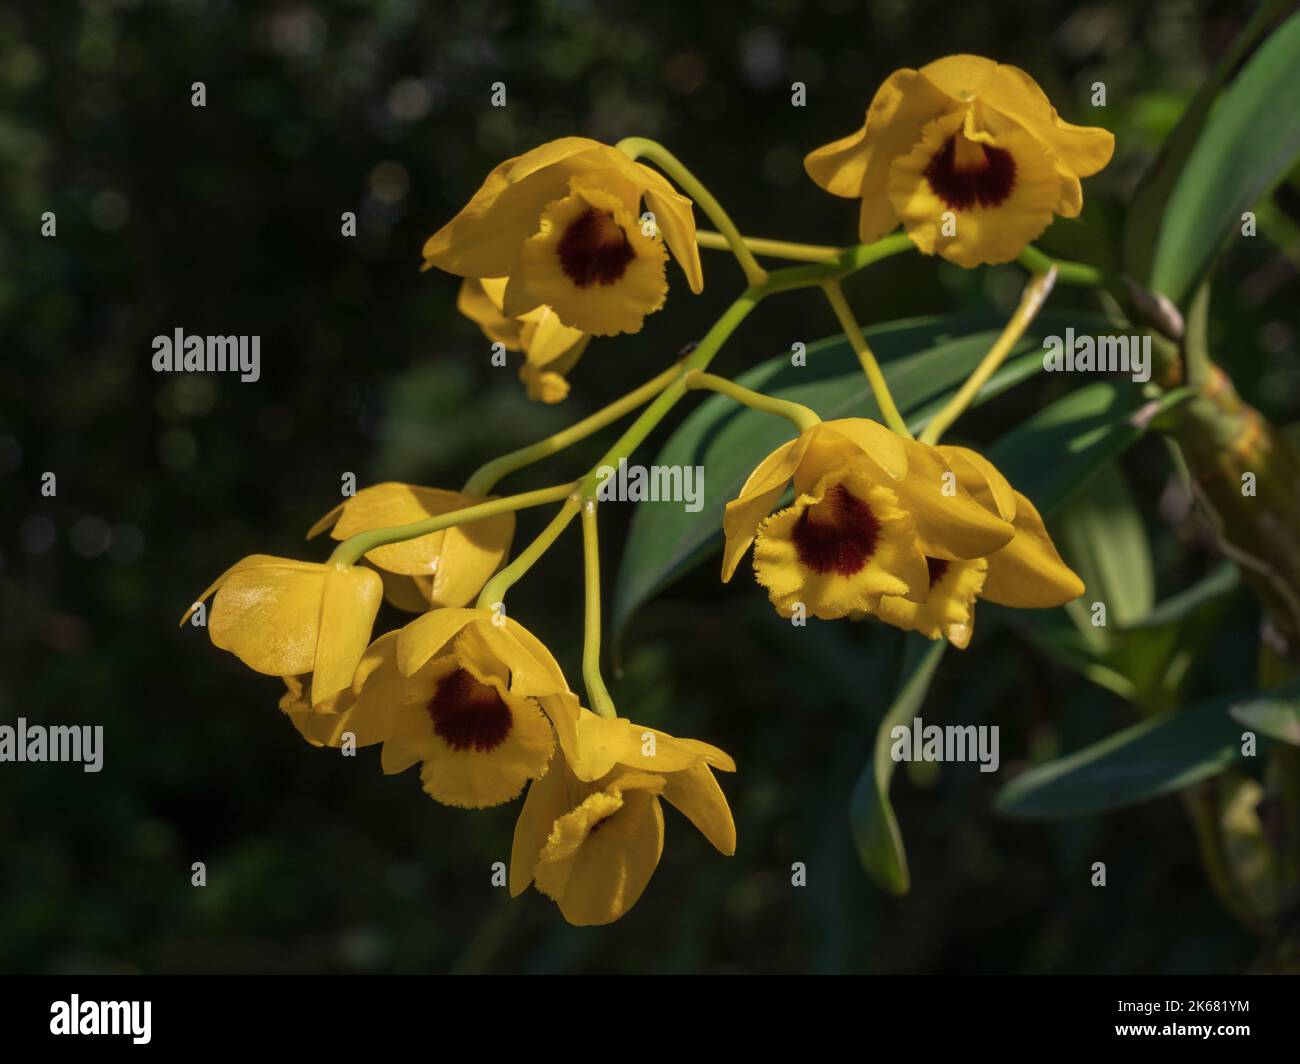 Closeup view of tropical orchid species dendrobium chrysotoxum var suavissimum yellow and dark red cluster of flowers isolated outdoors in sunlight Stock Photo